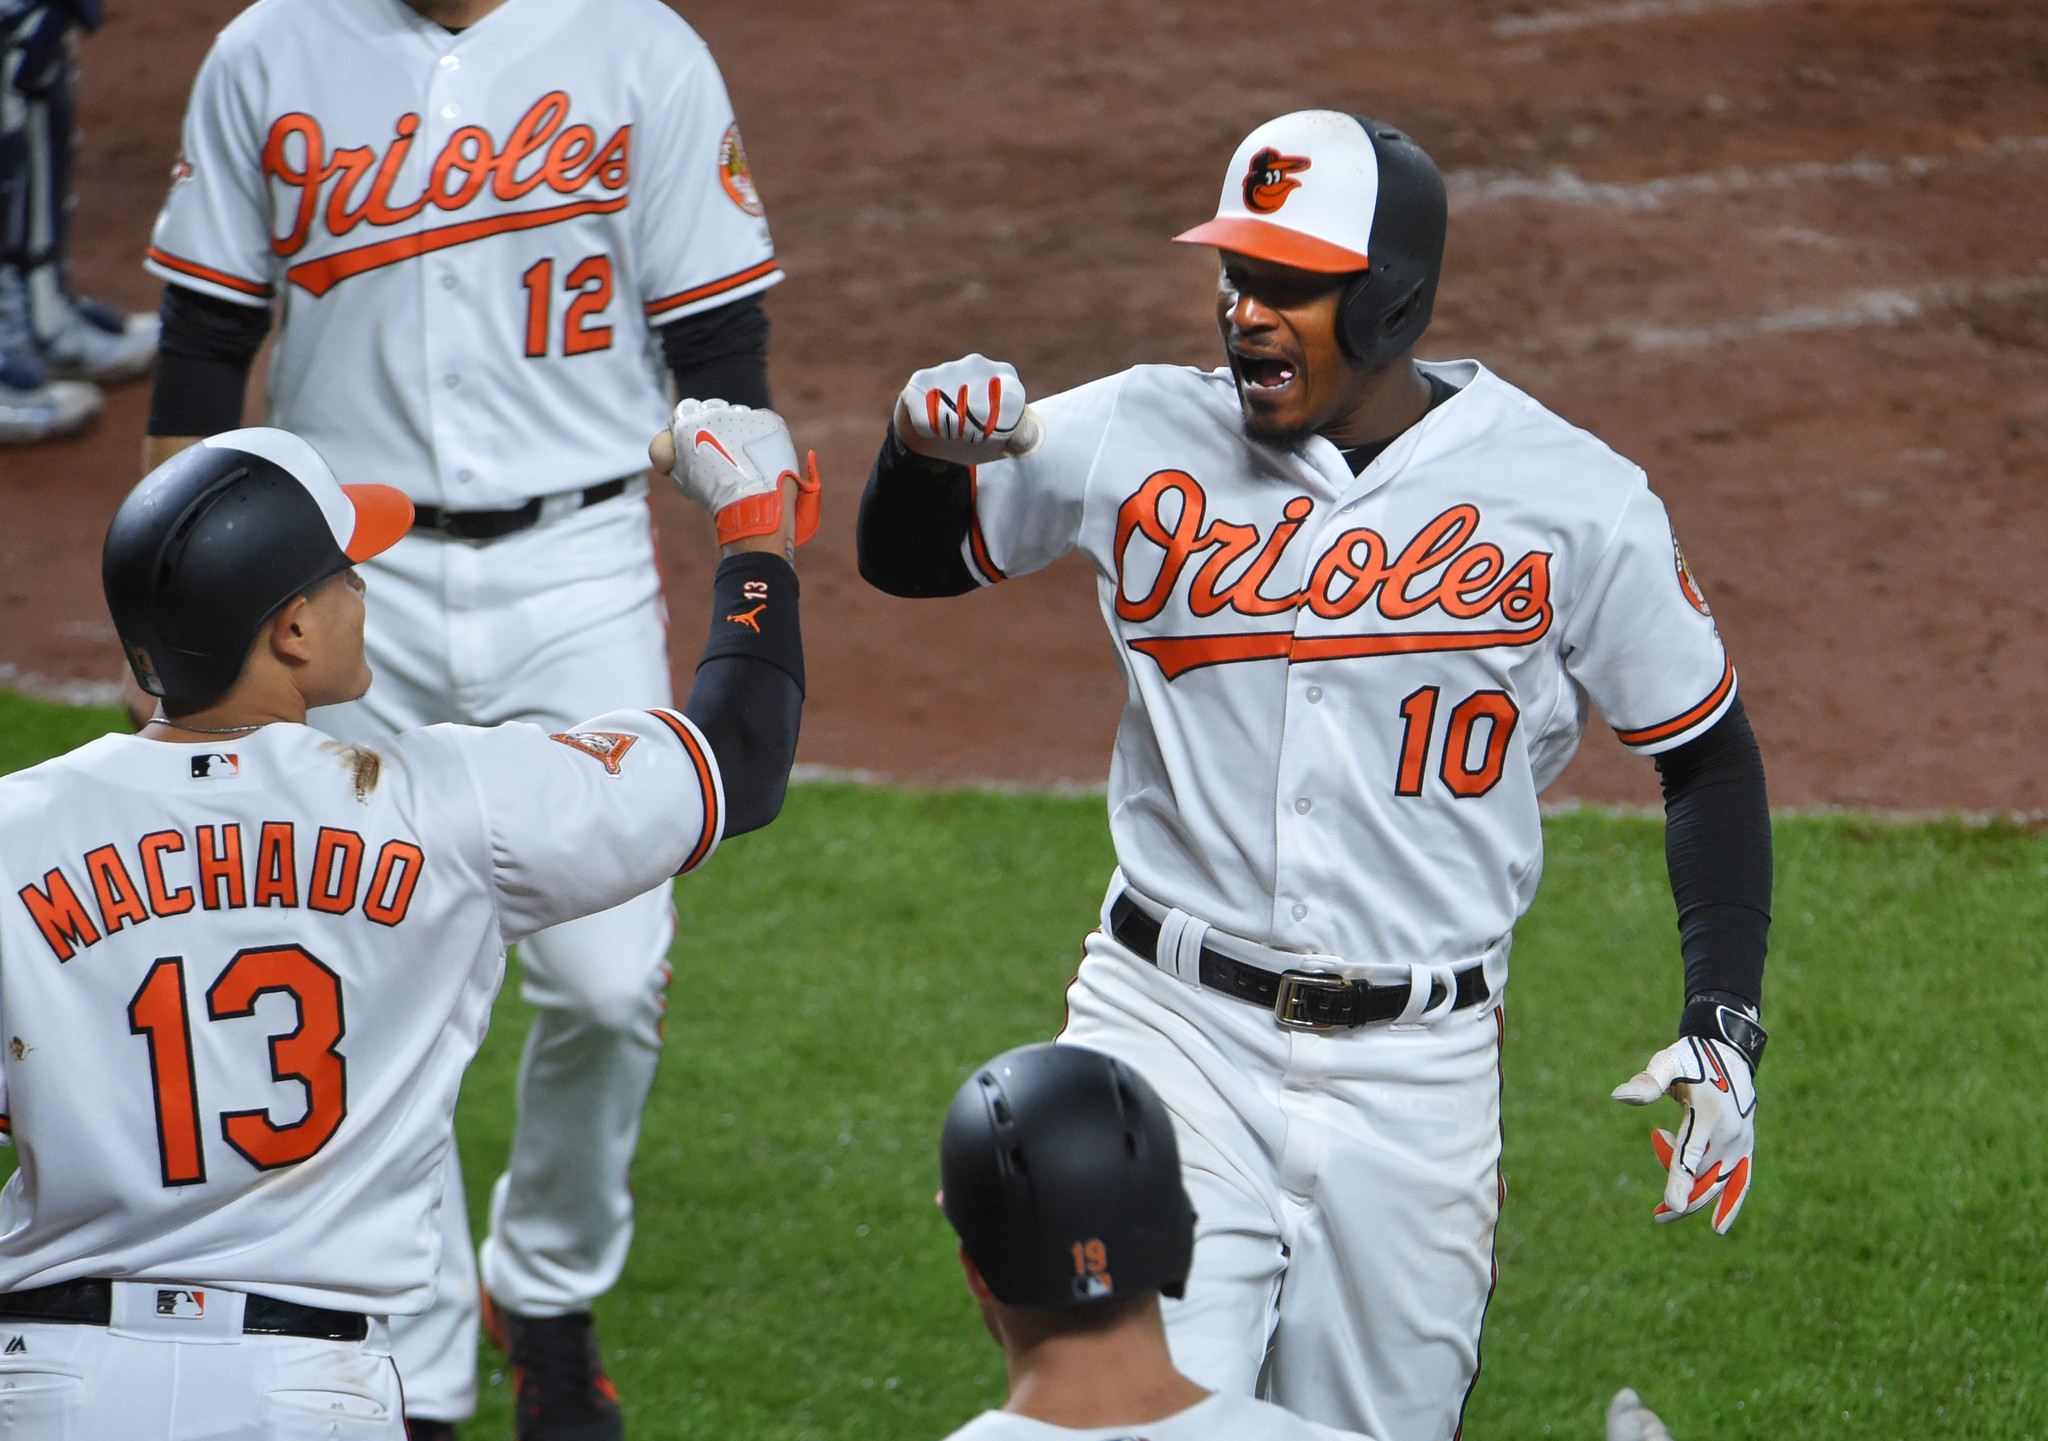 Homers by Kim, Schoop and Jones help Orioles rally past Rays, 6-3, in rain-delayed game